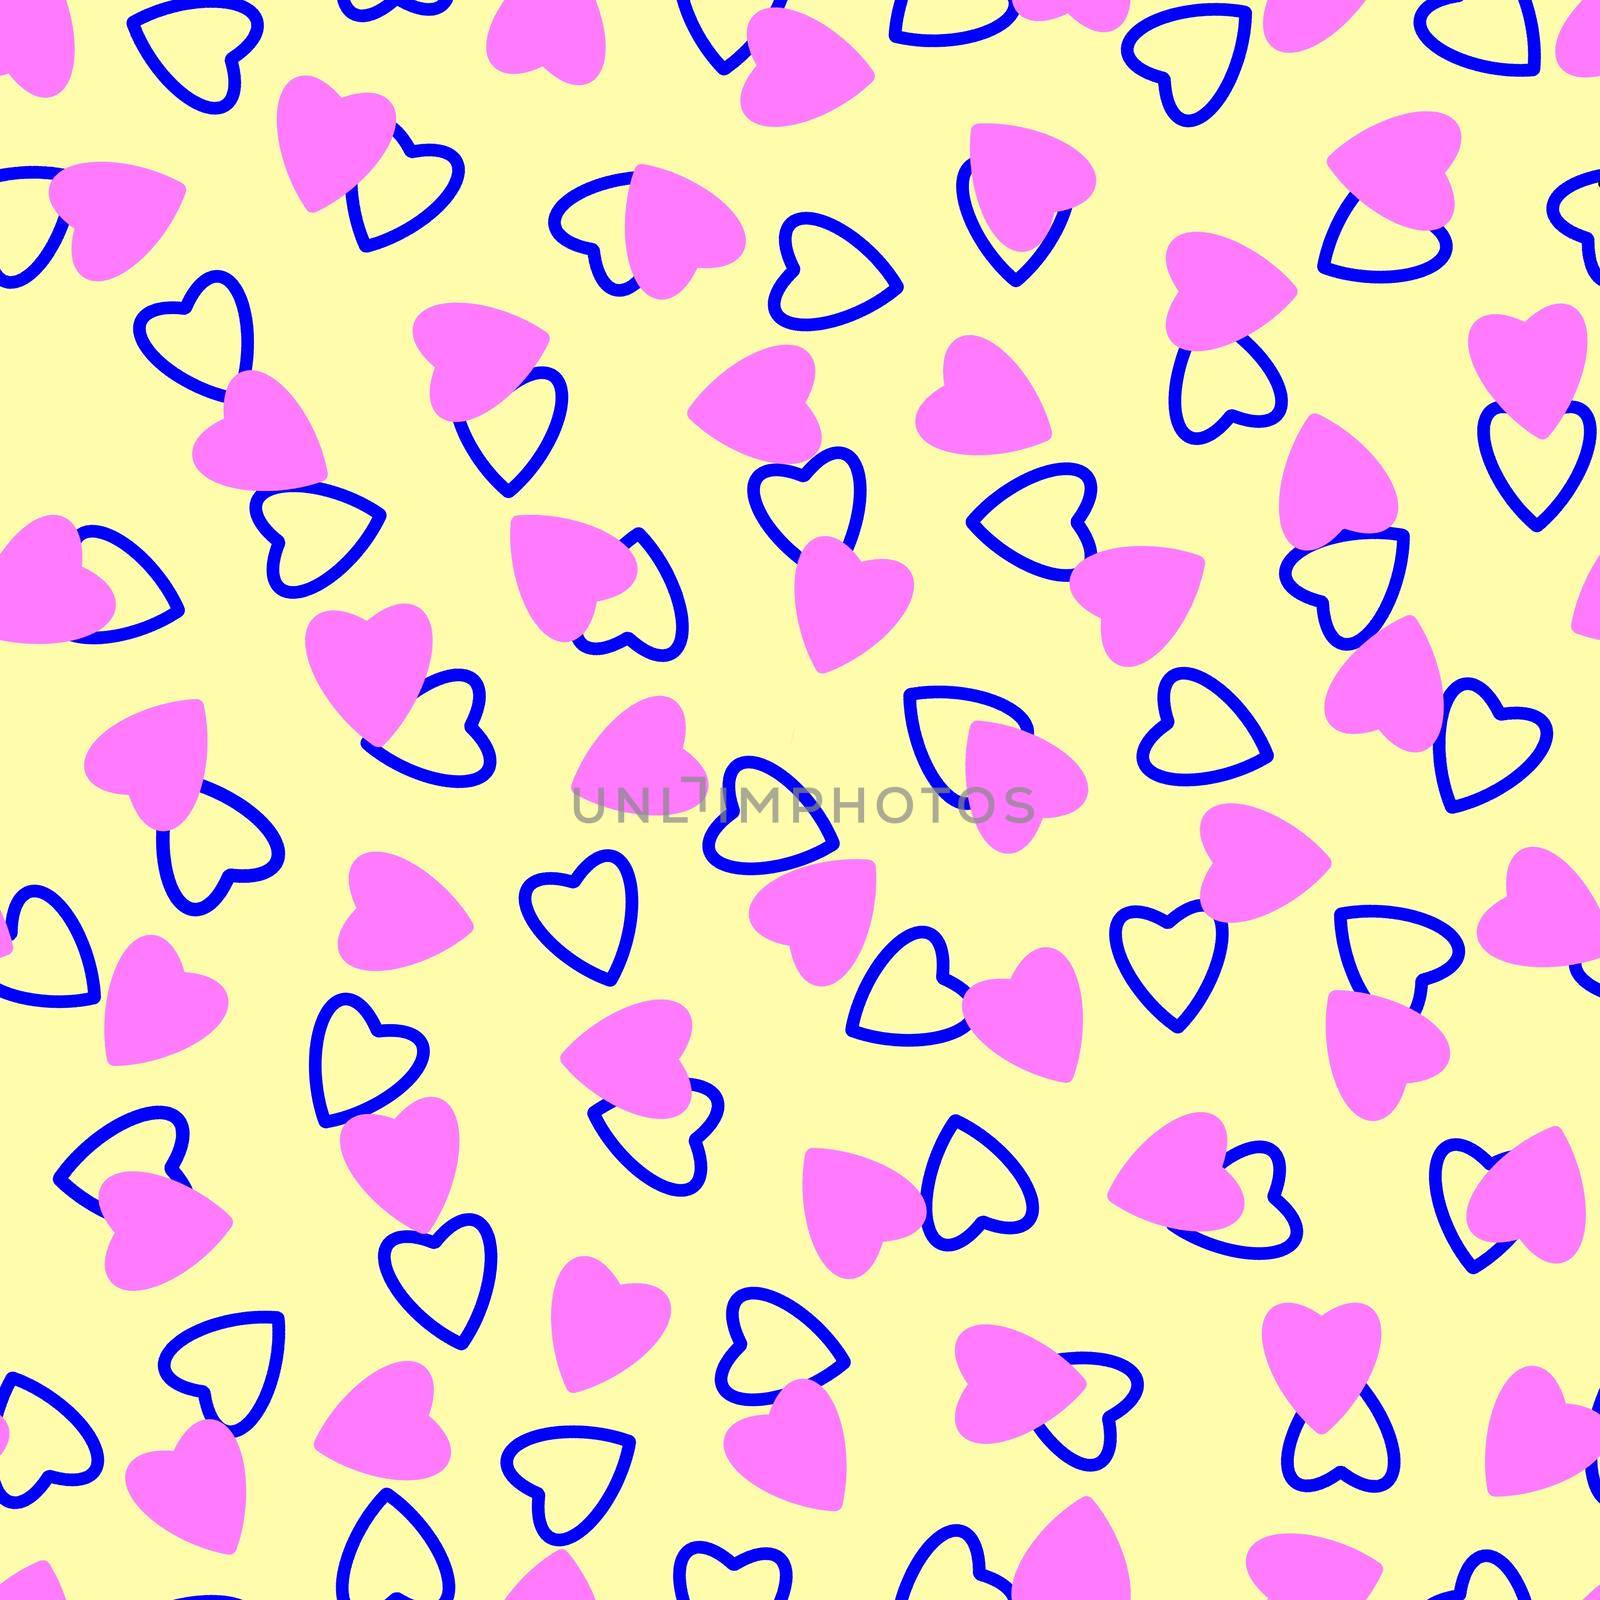 Simple hearts seamless pattern,endless chaotic texture made of tiny heart silhouettes.Valentines,mothers day background.Great for Easter,wedding,scrapbook,gift wrapping paper,textiles.Lilac,blue,ivory by Angelsmoon